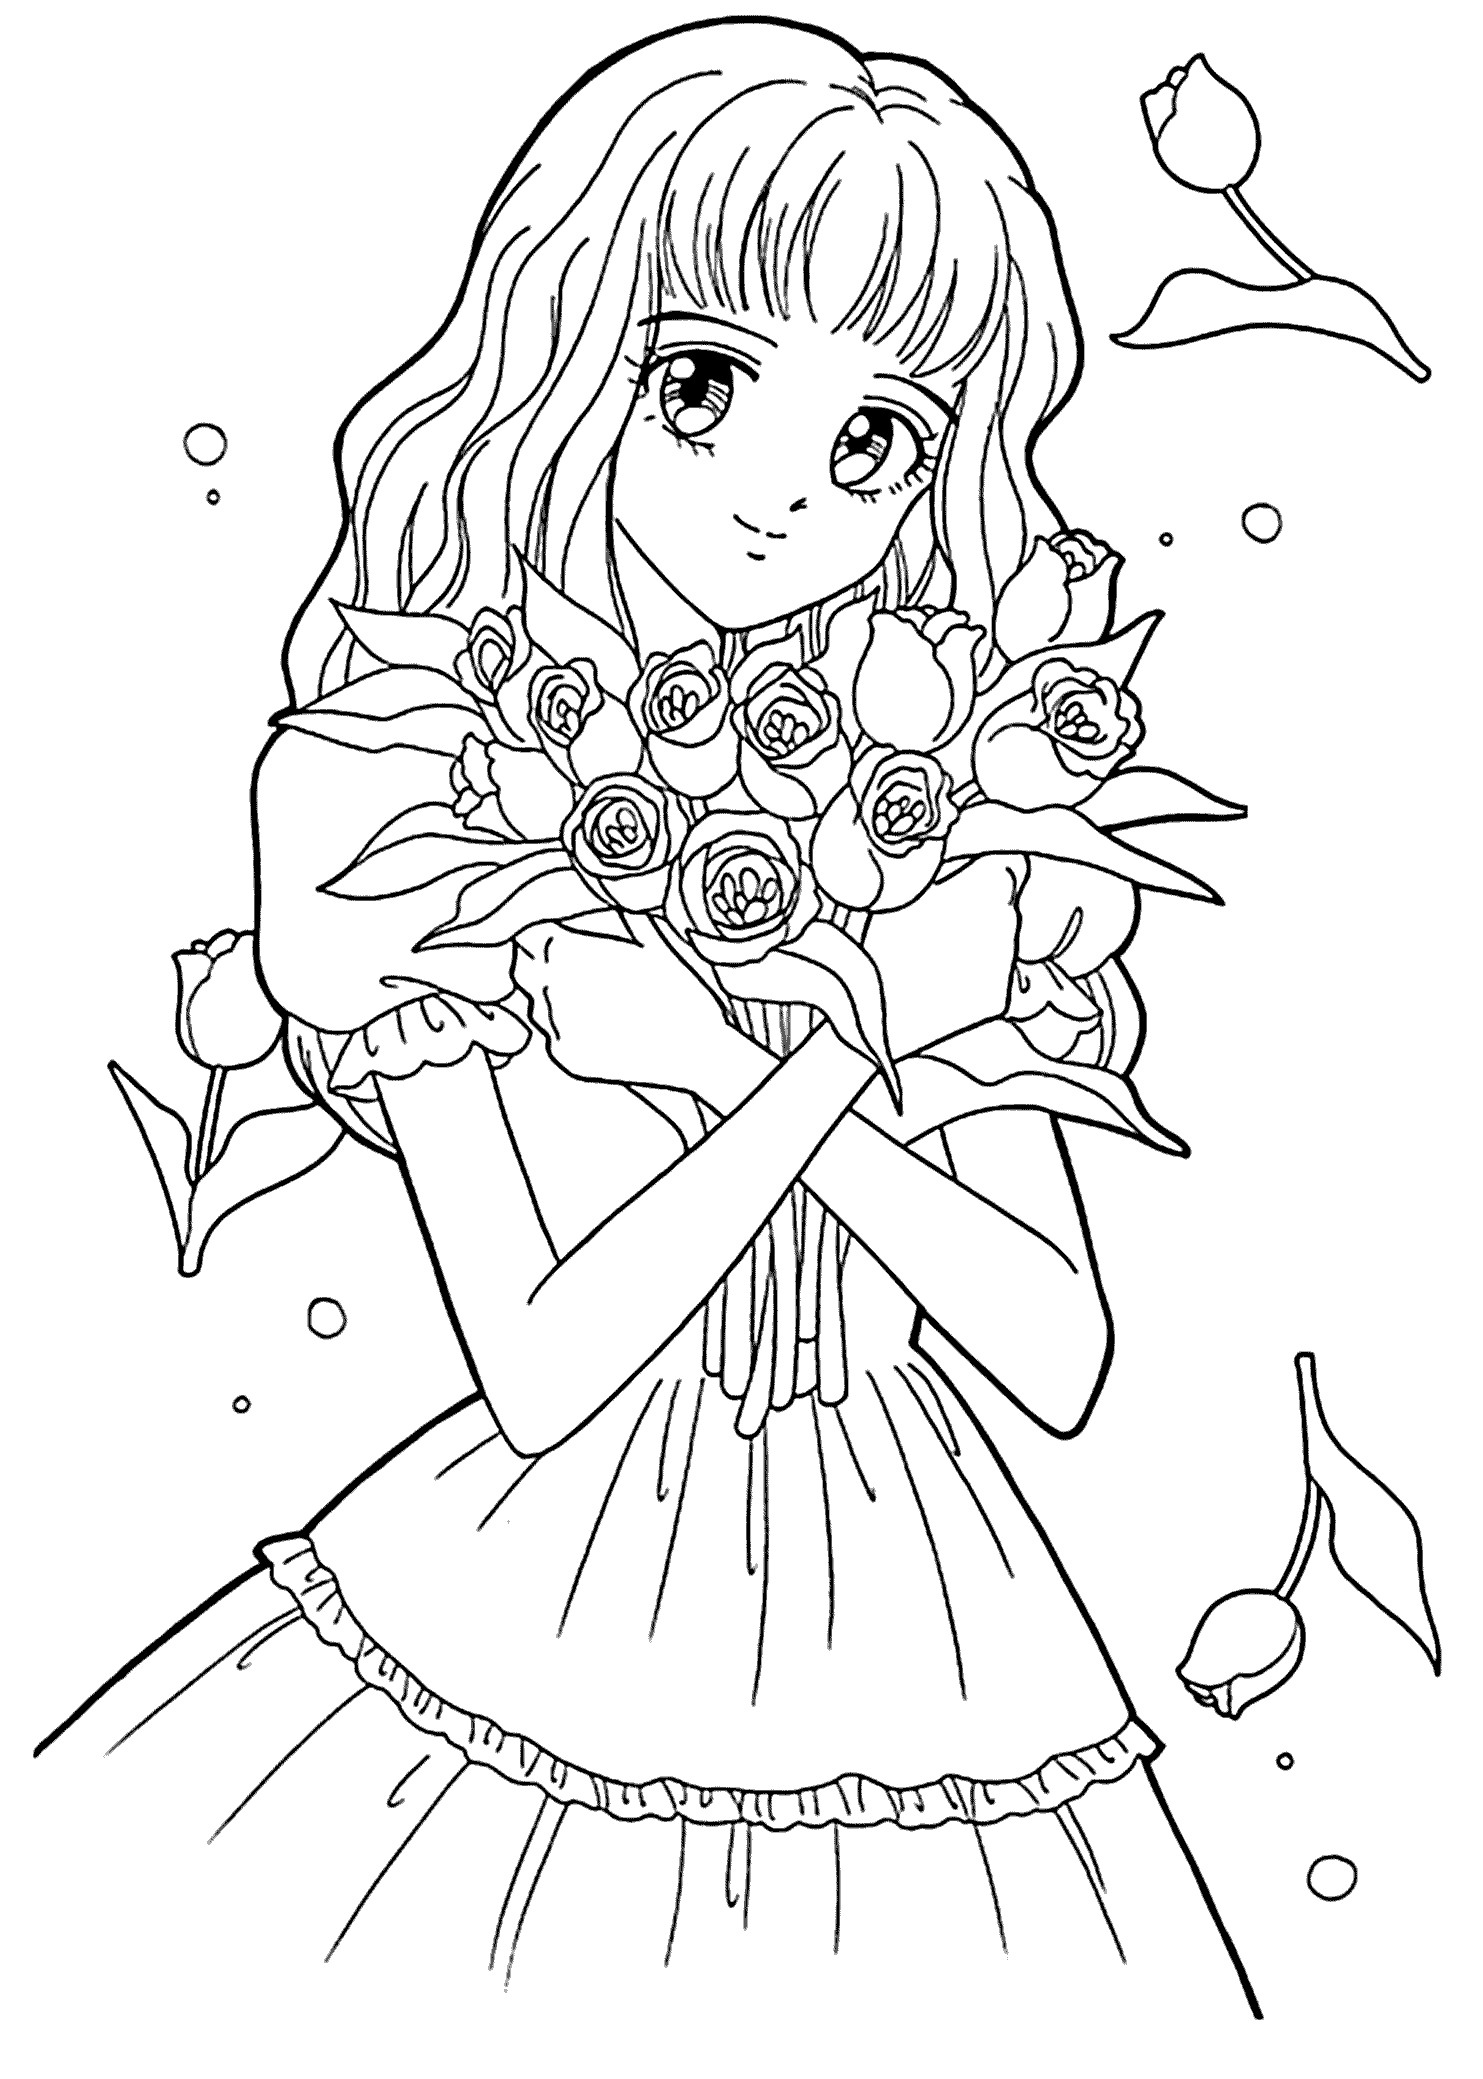 Coloring Sheets For Teenage Girls
 Best Free Printable Coloring Pages for Kids and Teens